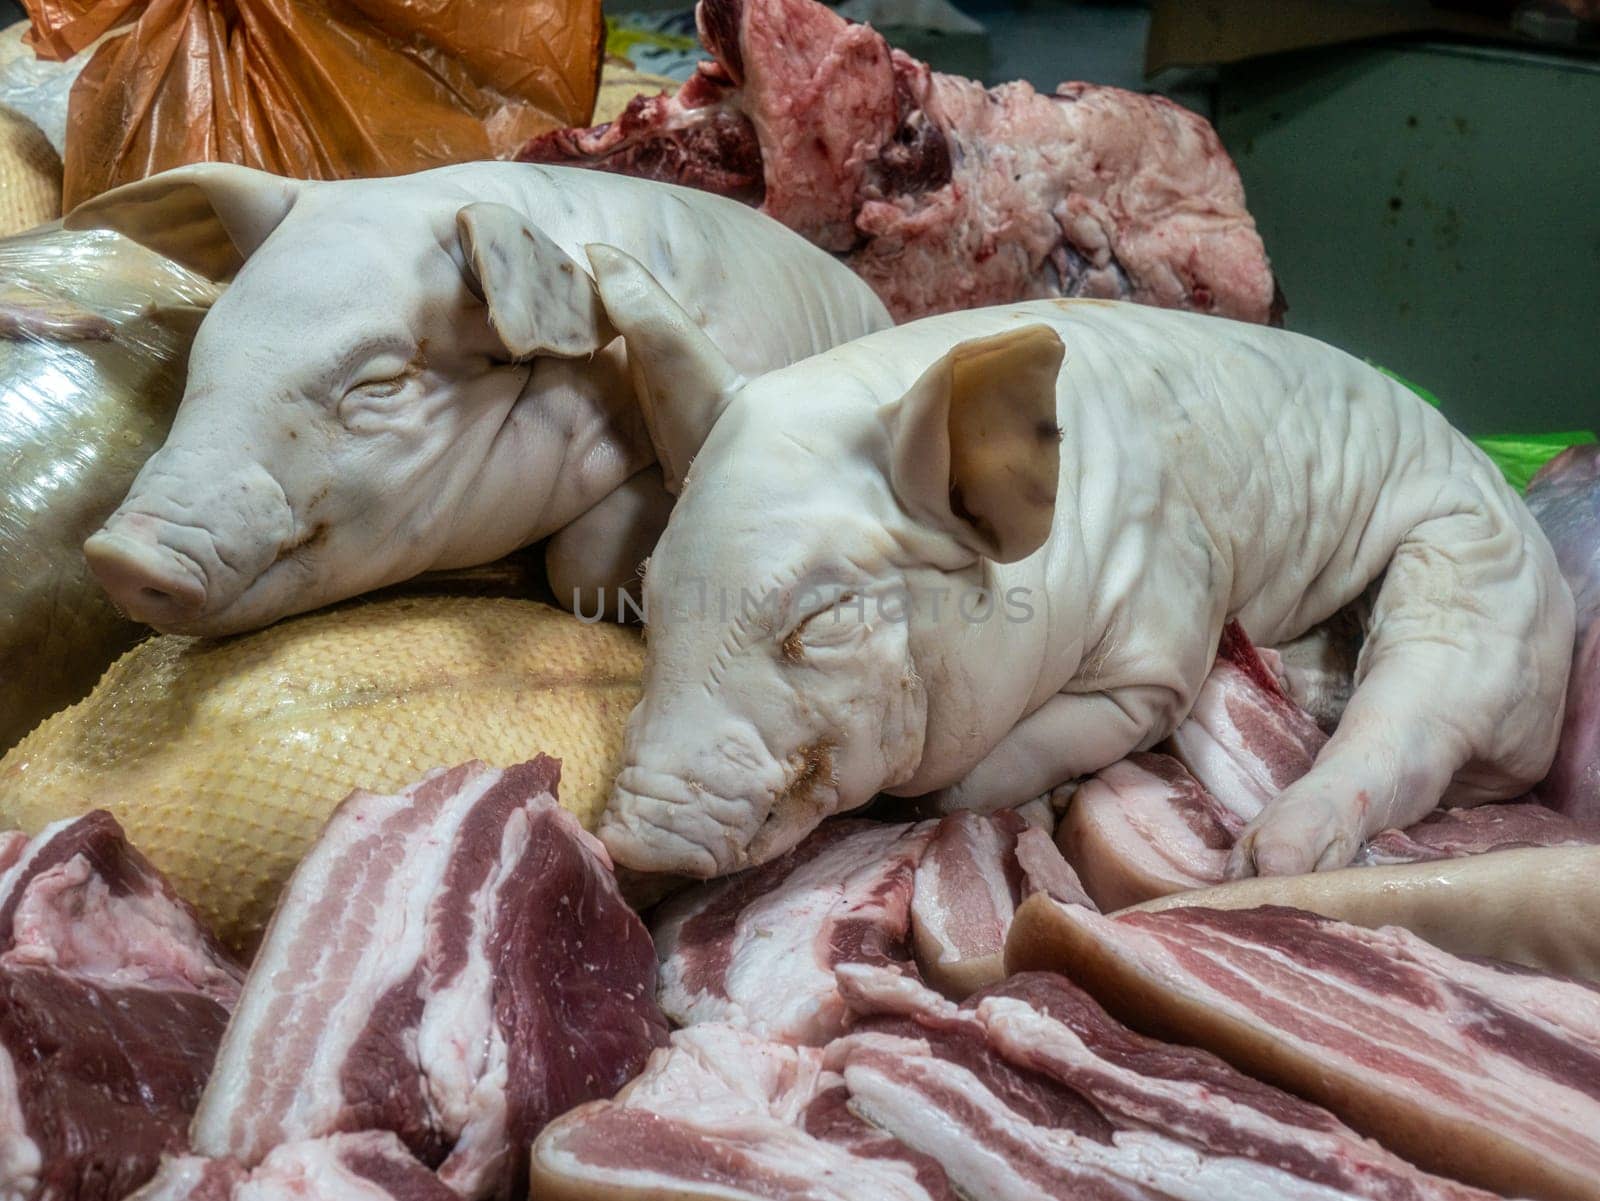 Two pig on the counter in the market. The meat Department in the store.